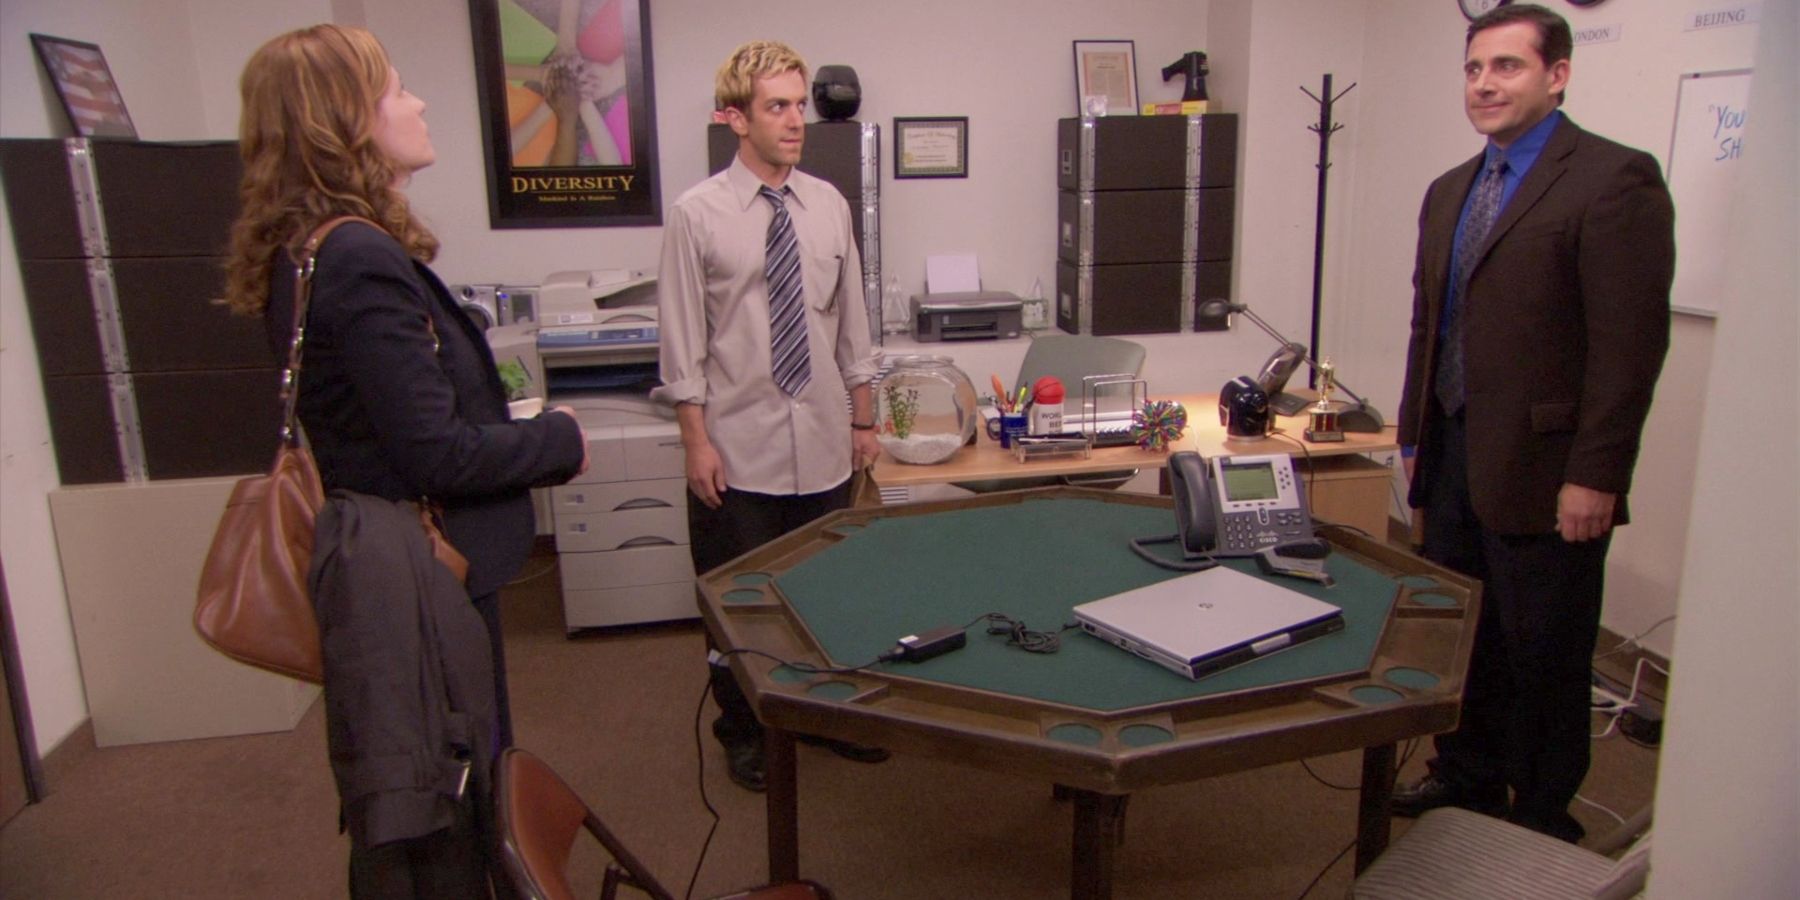 Pam (Jenna Fischer), Ryan (BJ Novak), and Michael (Steve Carell) standing around a table in an office for Michael Scott Paper Company in The Office